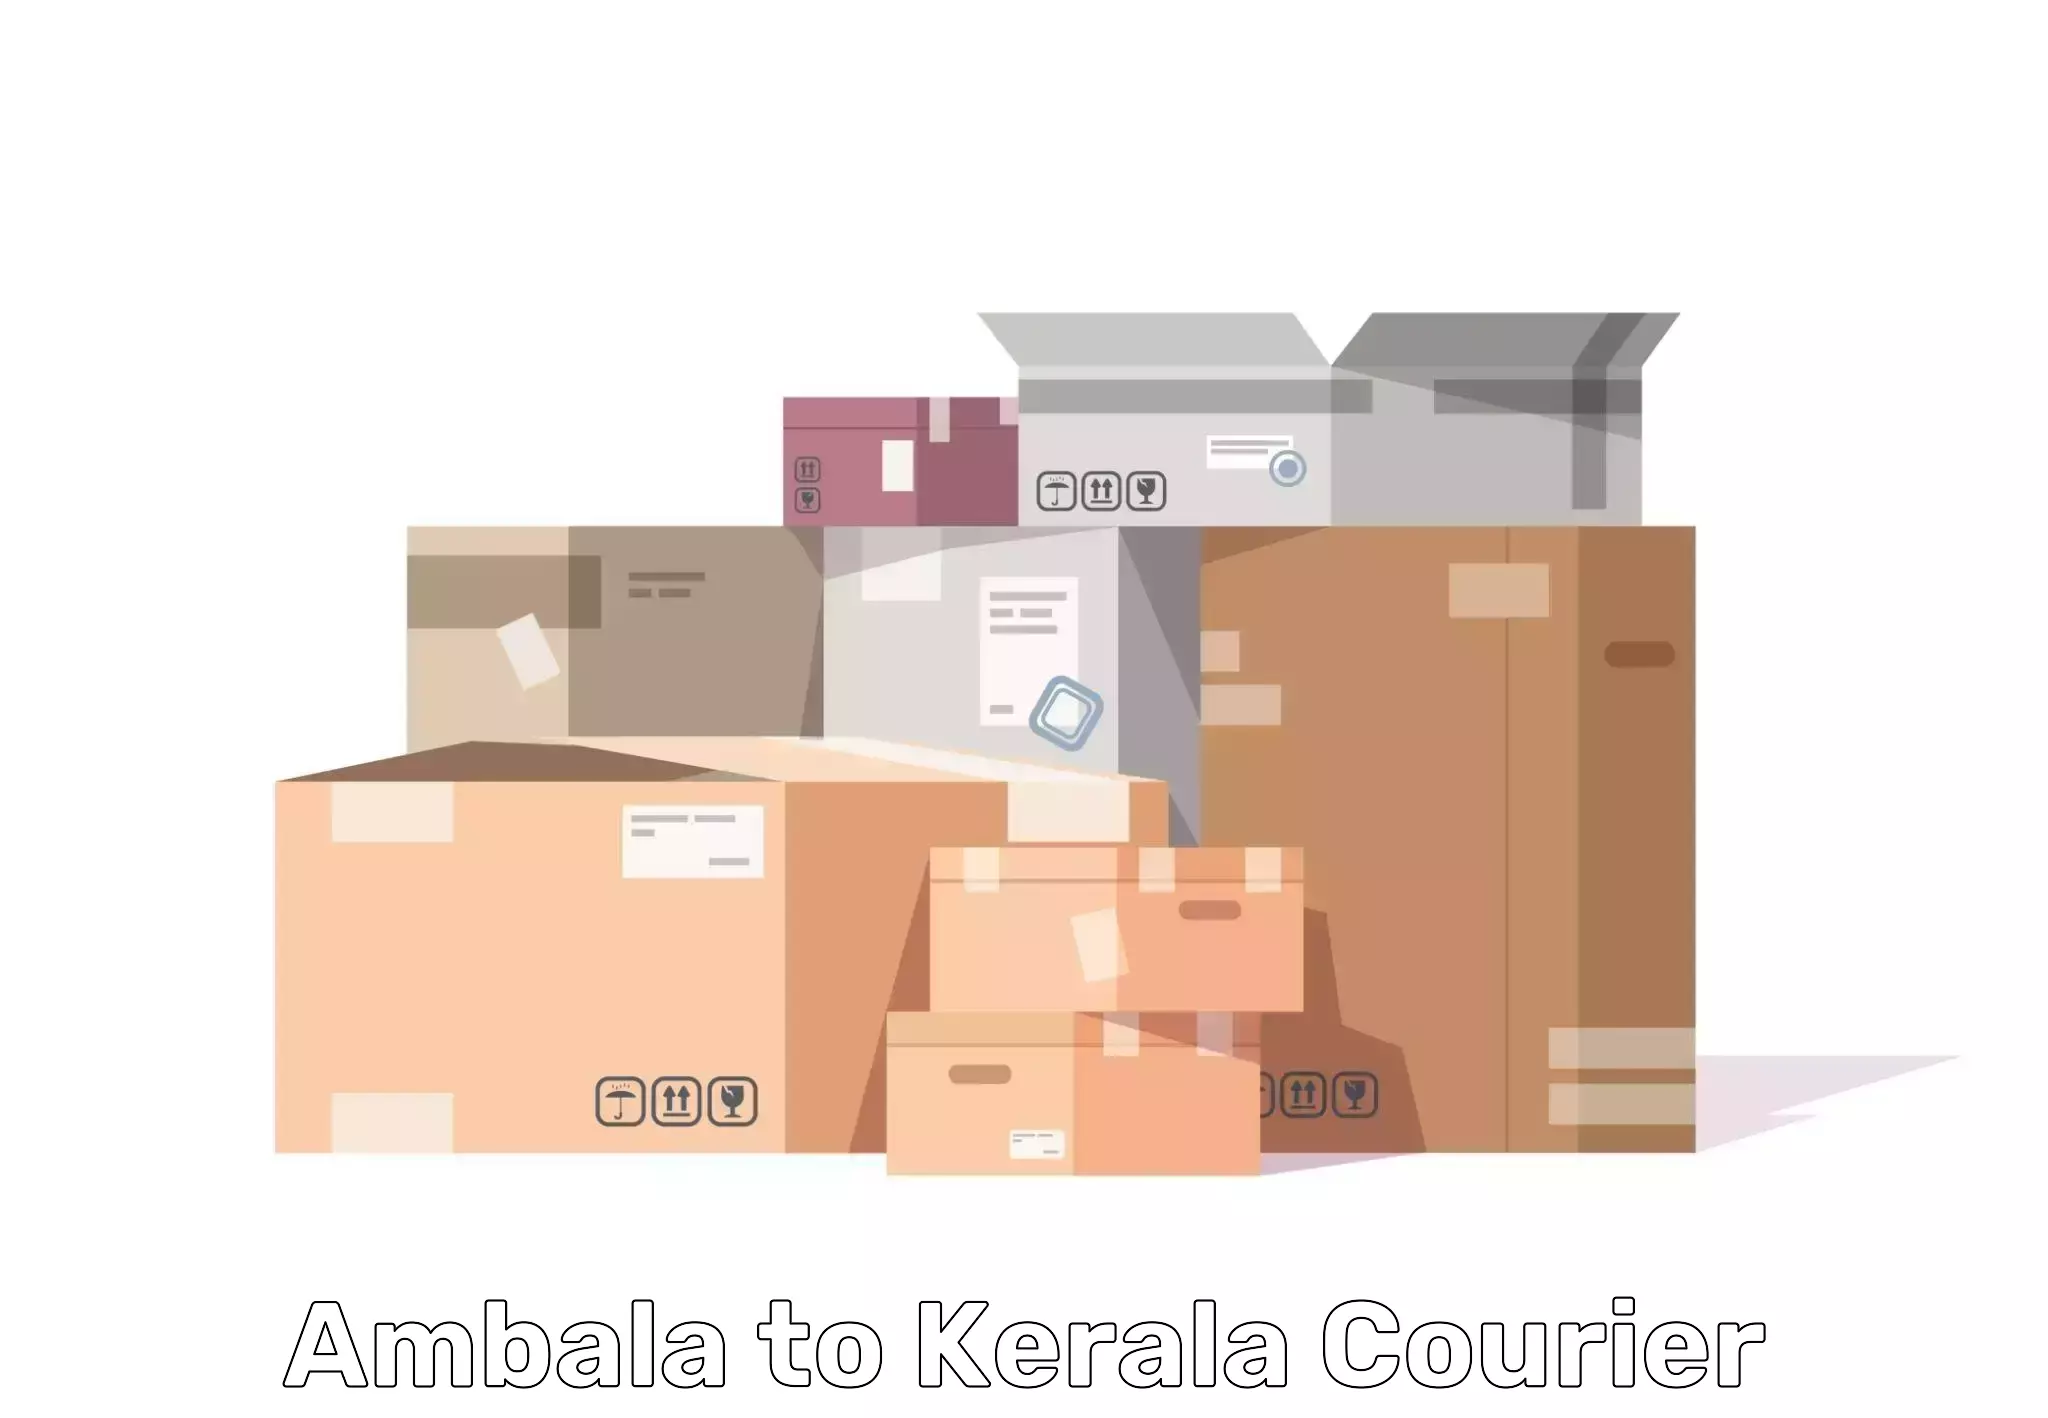 Furniture delivery service Ambala to Kumily